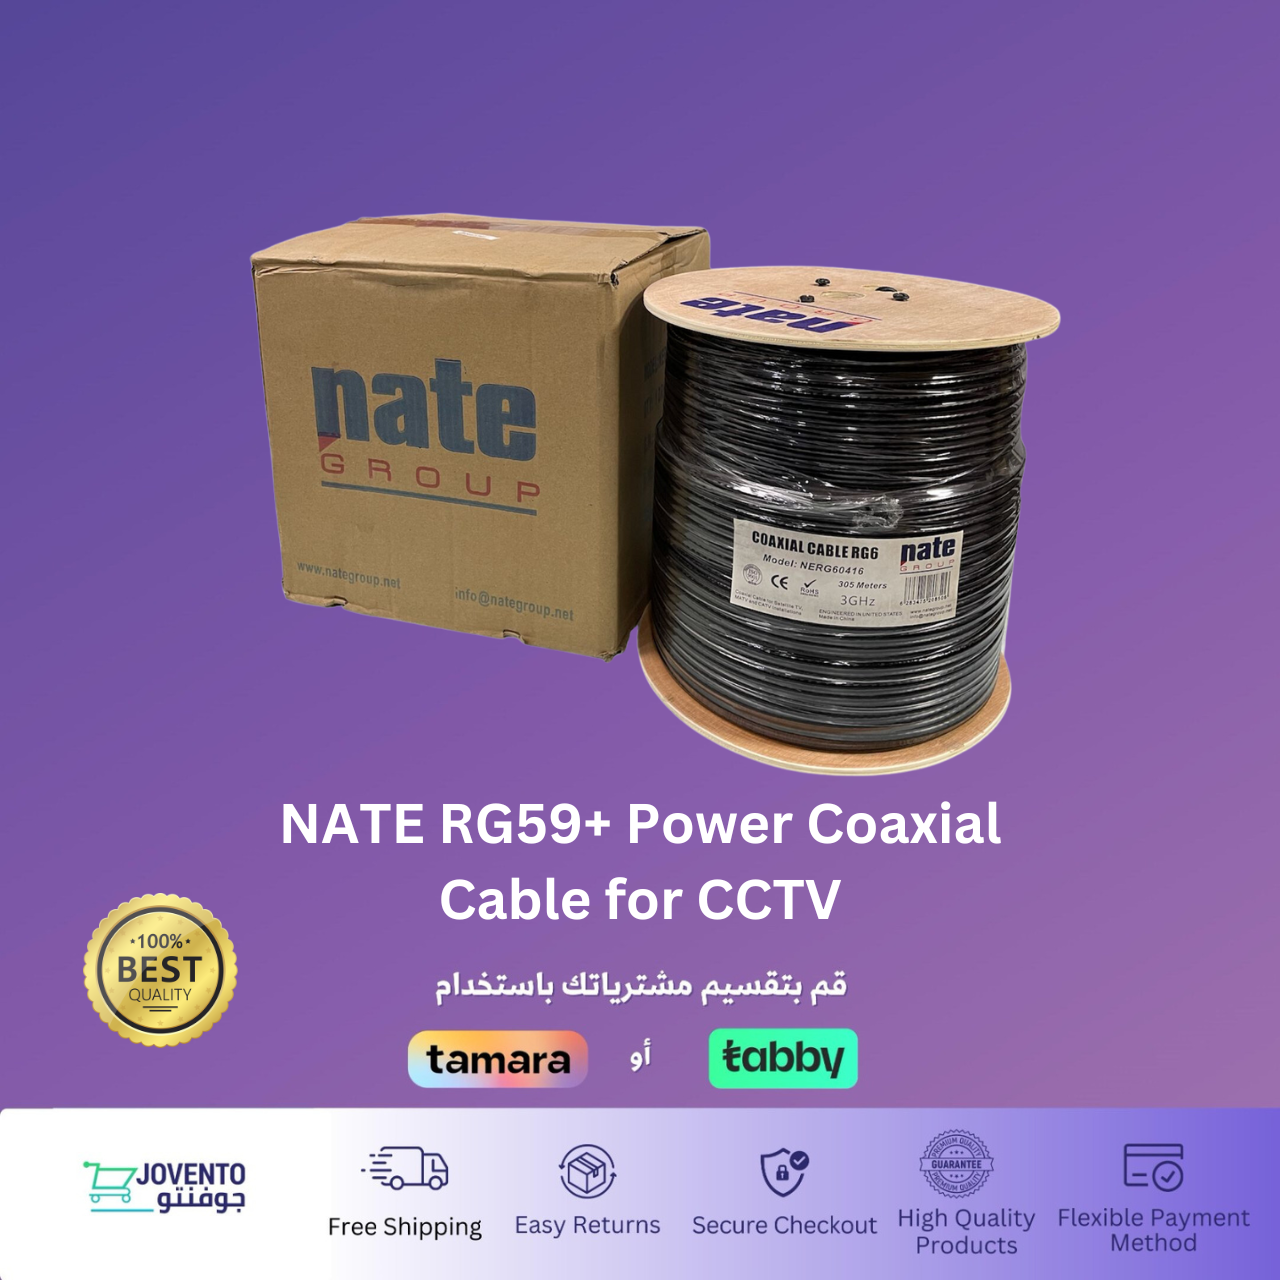 NATE RG59+ Power Coaxial Cable for CCTV